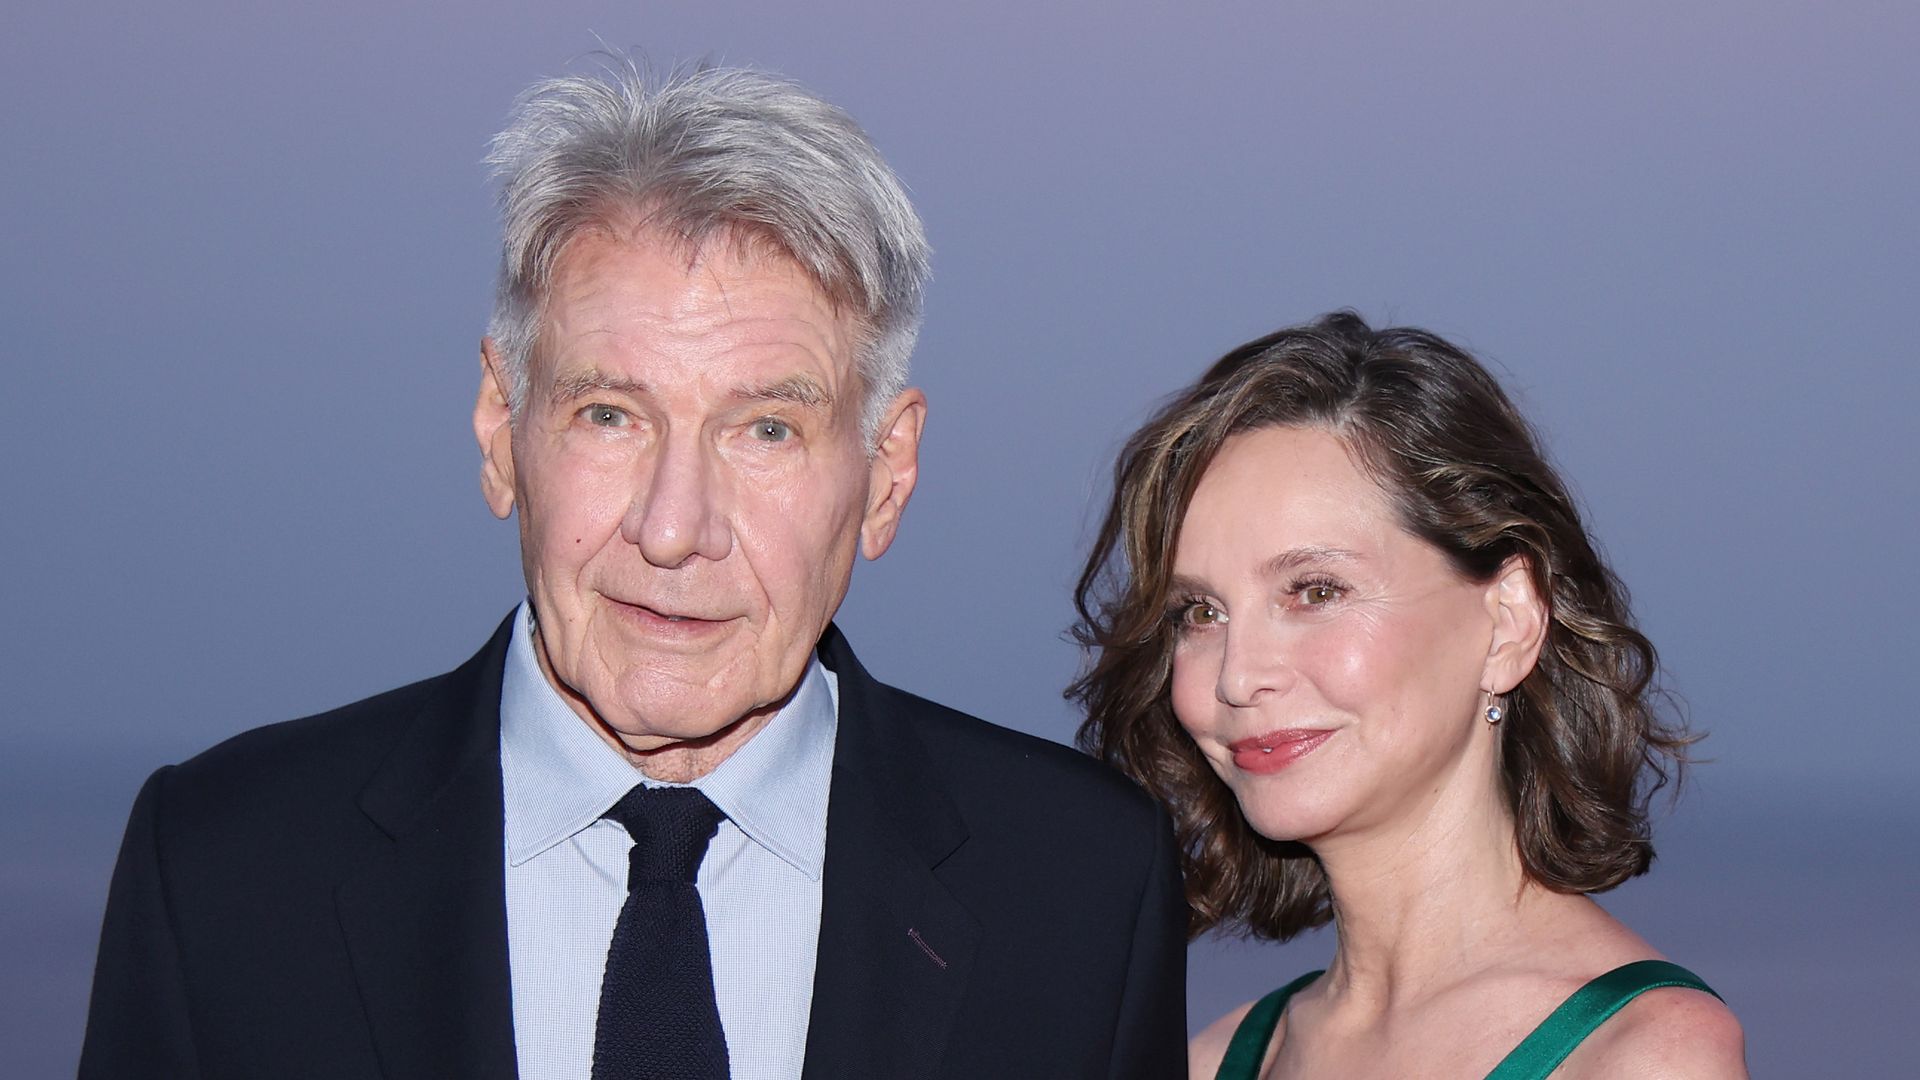 Harrison Ford, 80, Calista Flockhart, 58 turn heads in Italy as actress showcases her incredible physique in satin dress